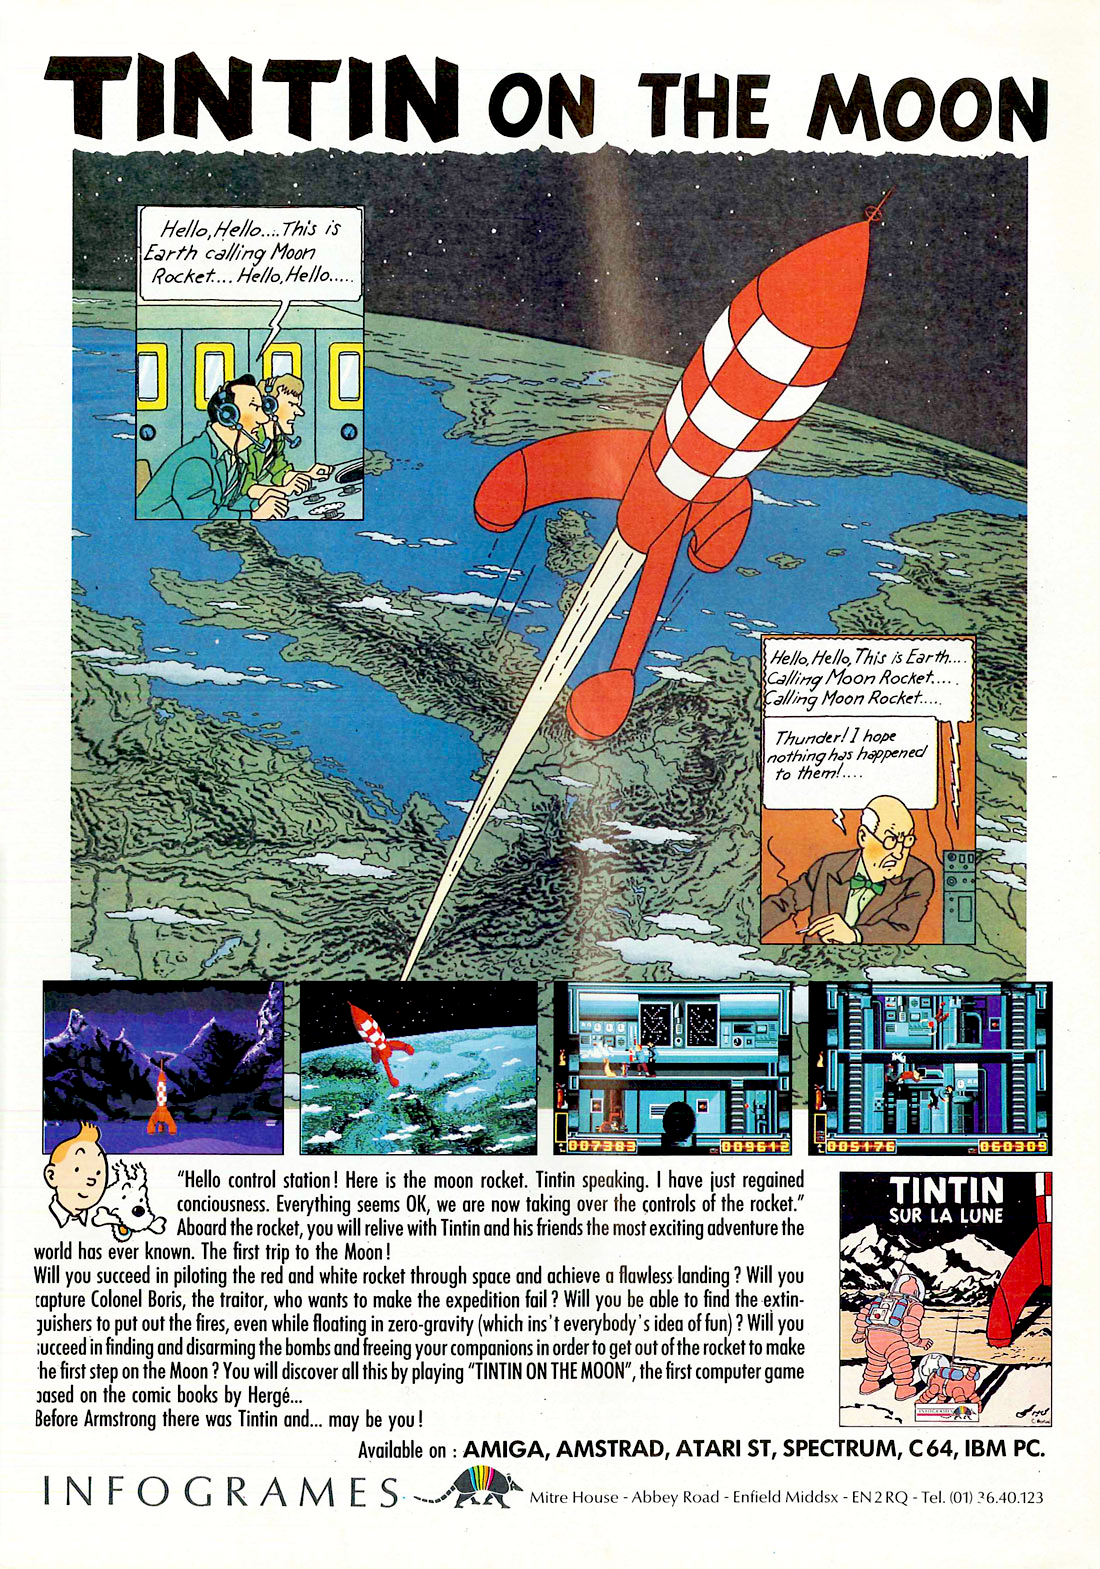 Image For Post | Hergé's famous cartoon character is brought to life in this multi-stage action game, specifically based around the episode of the same name. In many details the story was similar to the real moon landings, then many years off.

A more accurate title for the game would be 'Tintin Gets to the Moon', as reaching it is your challenge. The game is split into two distinct types of sections; the first of these involves guiding the rocket through space. Steer it to avoid contact with asteroids, and to collect eight red spheres. Yellow spheres boost energy, and so should be collected.

This is followed by a platform-based battle, as the evil Captain Jurgen has tied up several crew members, planted time bombs, and started several fires. Use your extinguisher on Jurgen and the fires, and touch the bombs and crew members to solve those problems. Turn gravity off to reach the more troublesome bombs.